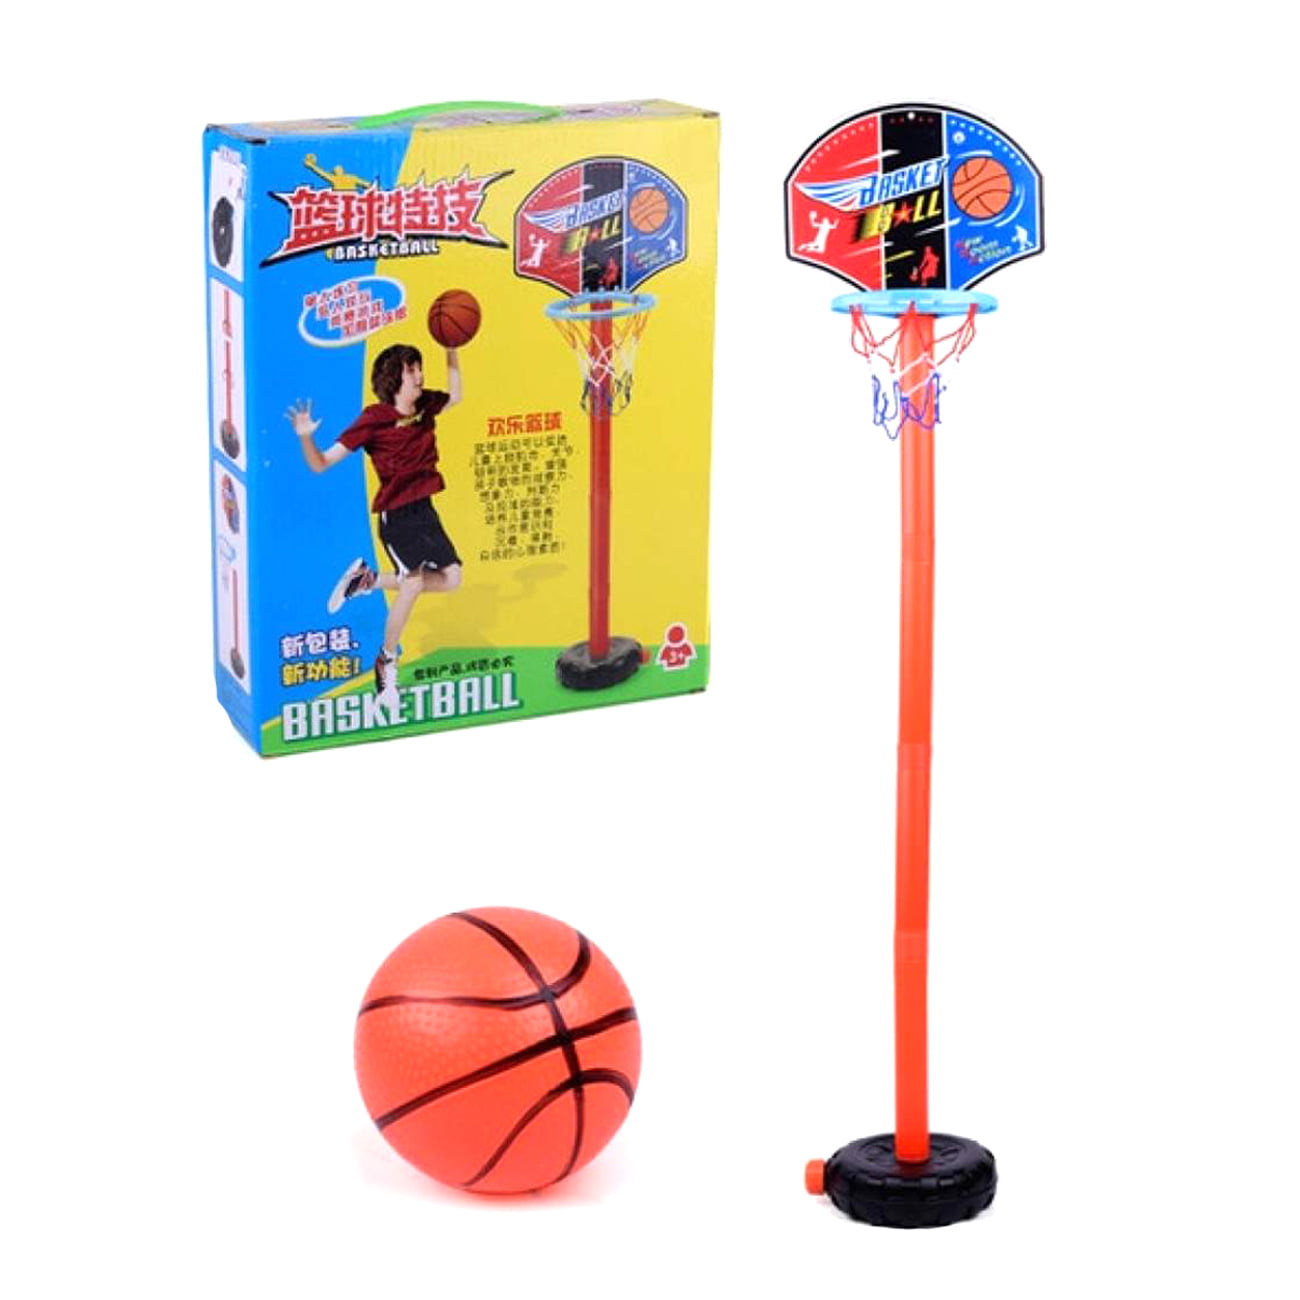 Kids Basketball Set Basketball Hoop Stand Set Adjustable Height 0.45M-1.1M with Ball and Net Play Sport Games Shooting Rack for Children Outdoor Indoor Play